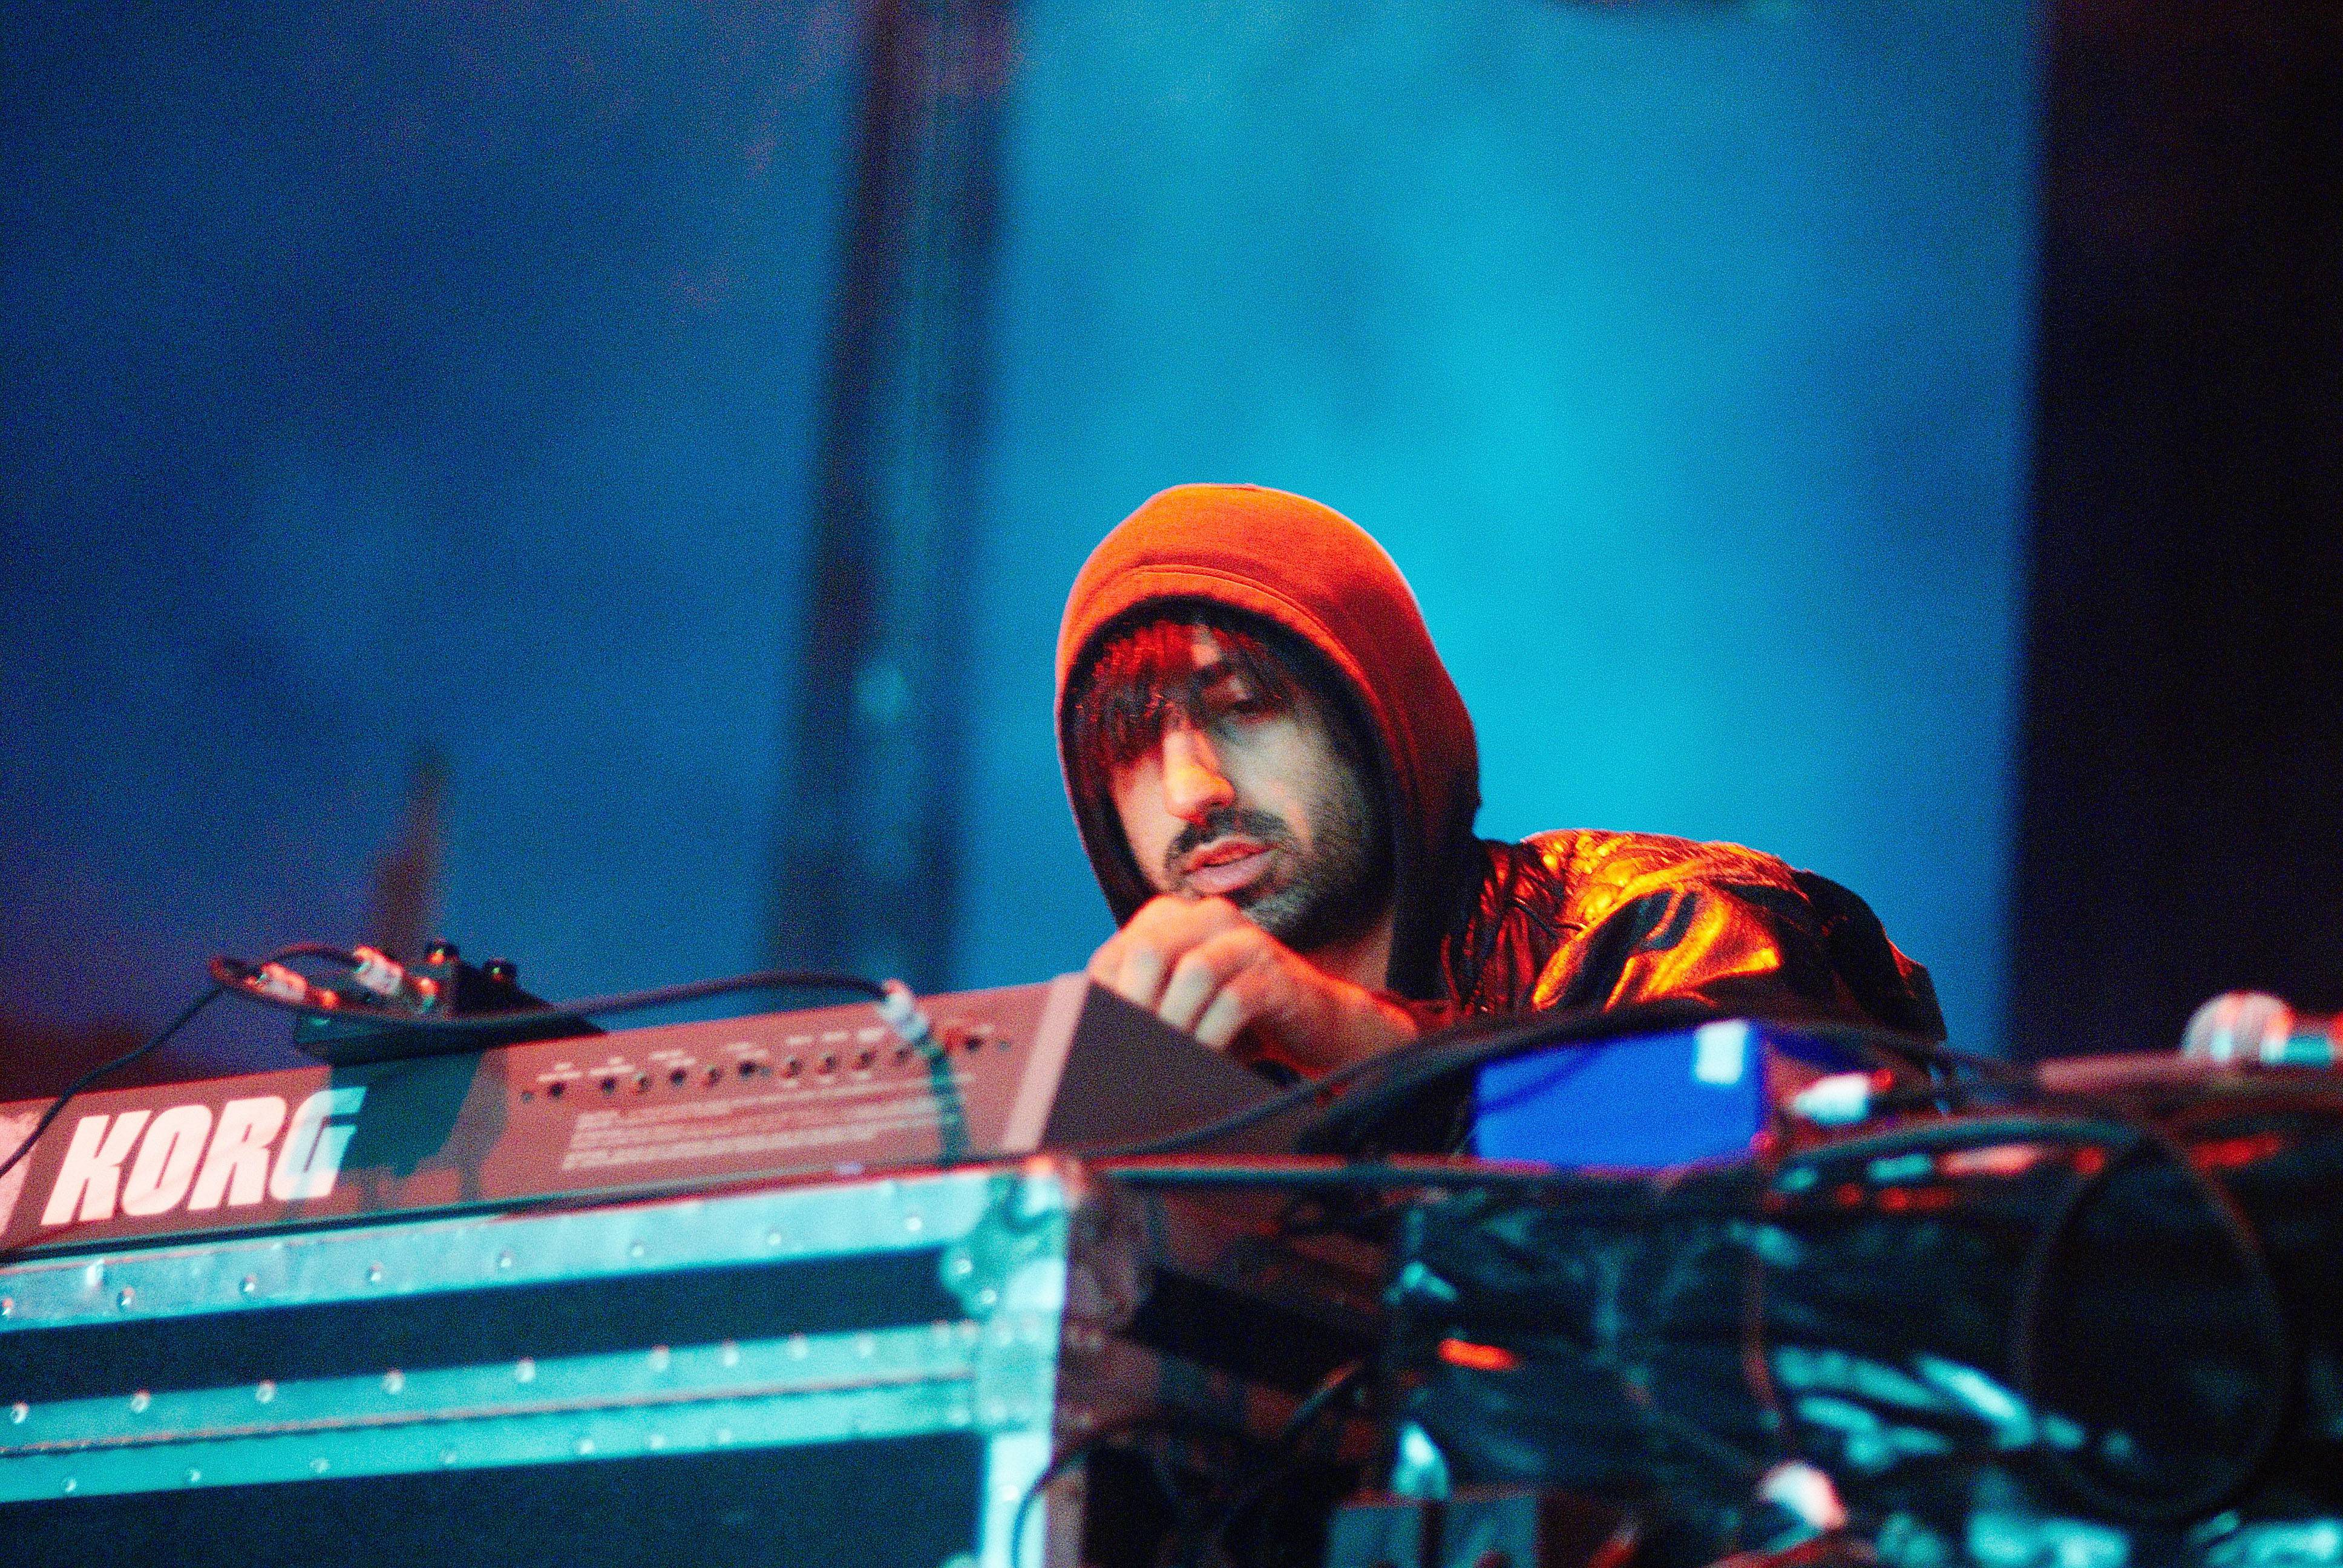 UNITED KINGDOM - AUGUST 22: LEEDS FESTIVAL Photo of CRYSTAL CASTLES and Ethan KATH, Ethan Kath performing on stage (Photo by Gary Wolstenholme/Redferns) (Gary Wolstenholme—Redferns)